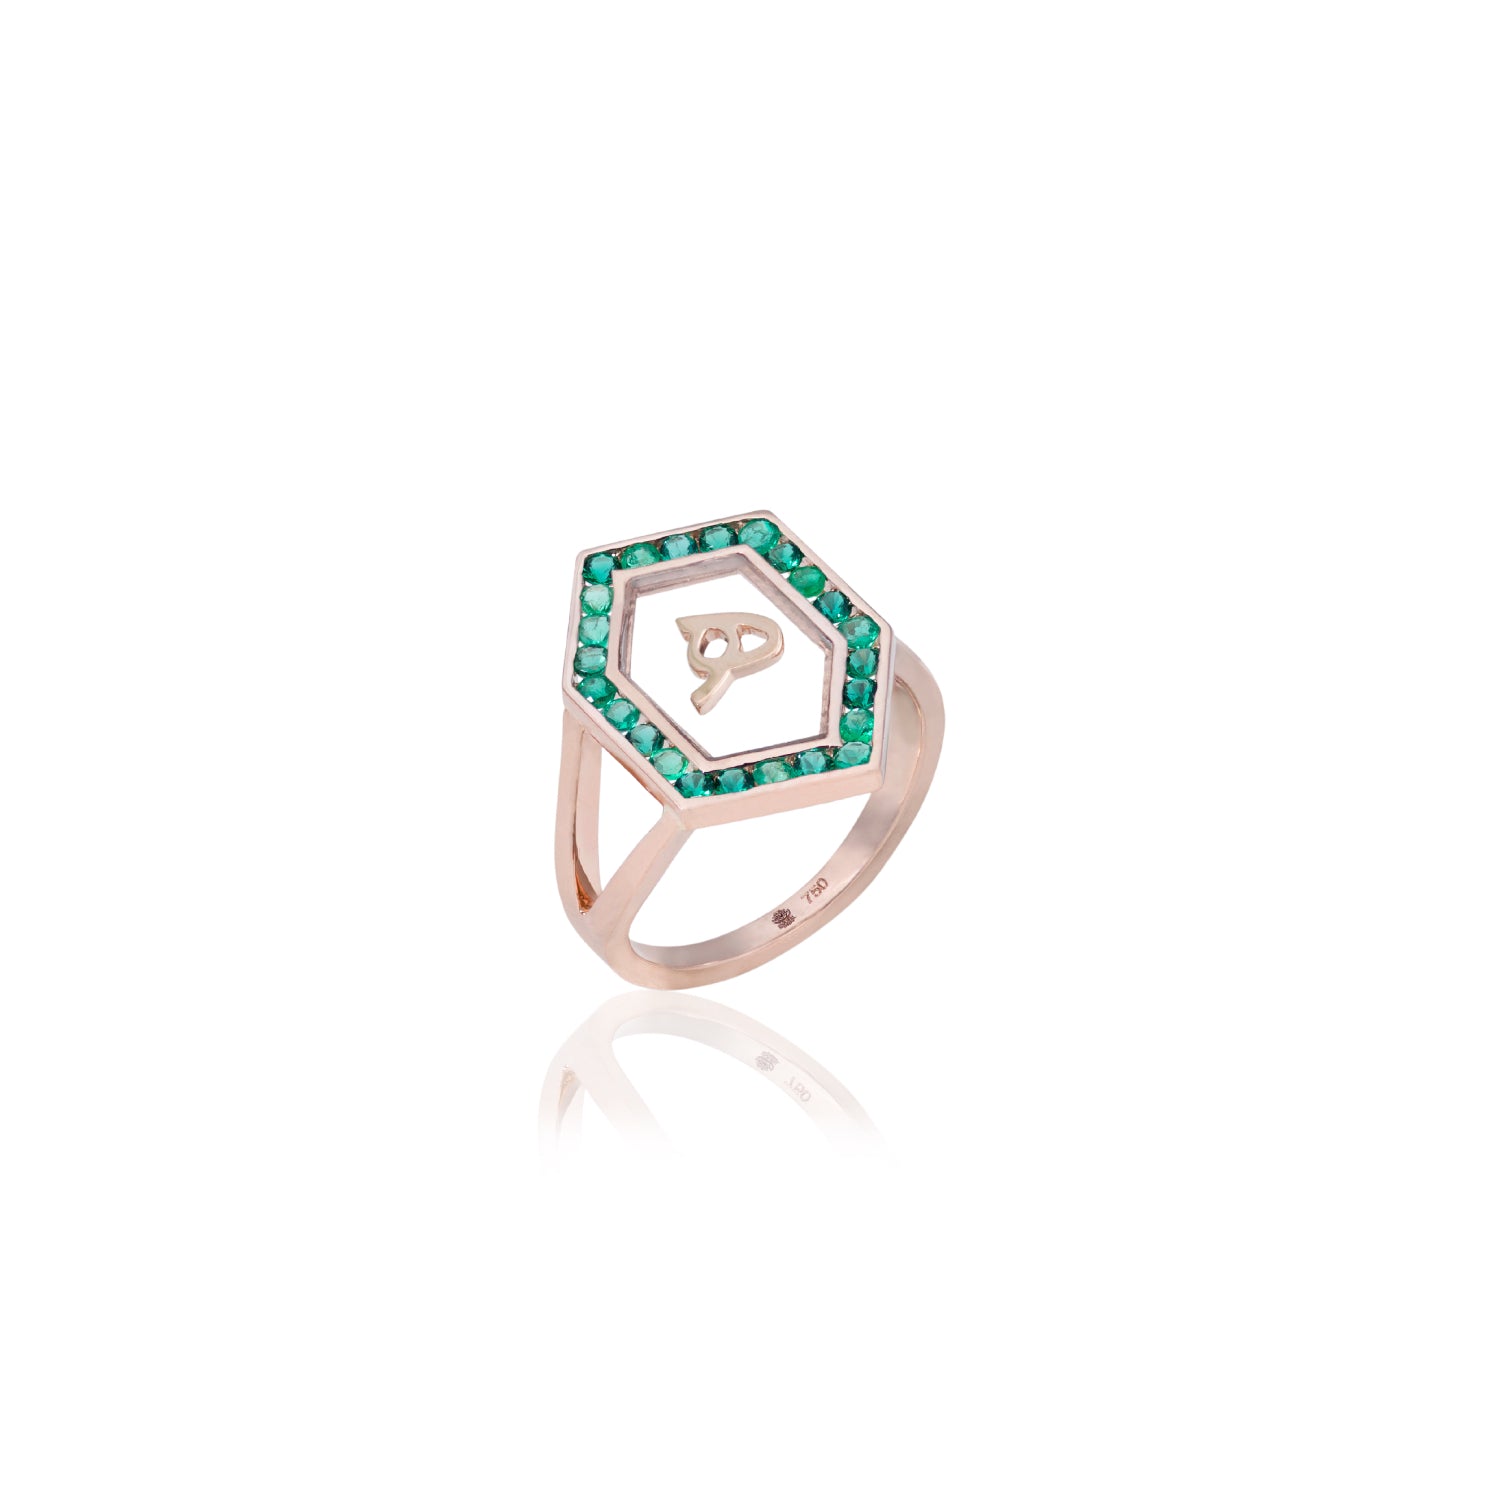 Qamoos 1.0 Letter هـ Emerald Ring in Rose Gold